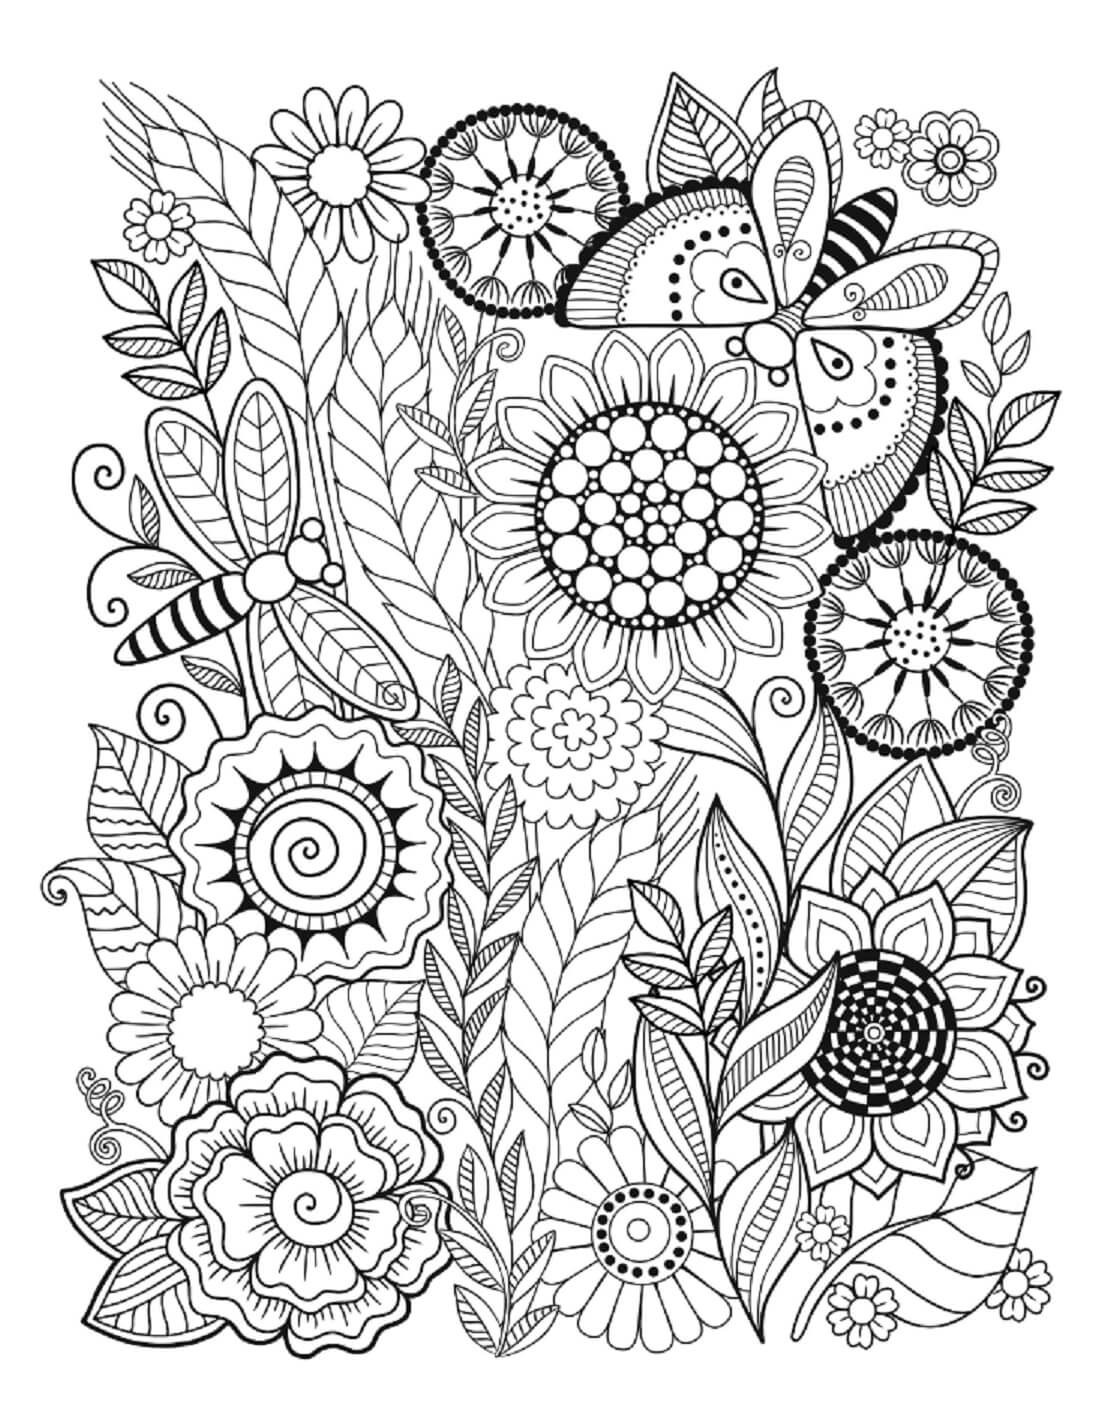 Mandala Insects with Flowers and Leaves in Summer Coloring Page Mandala